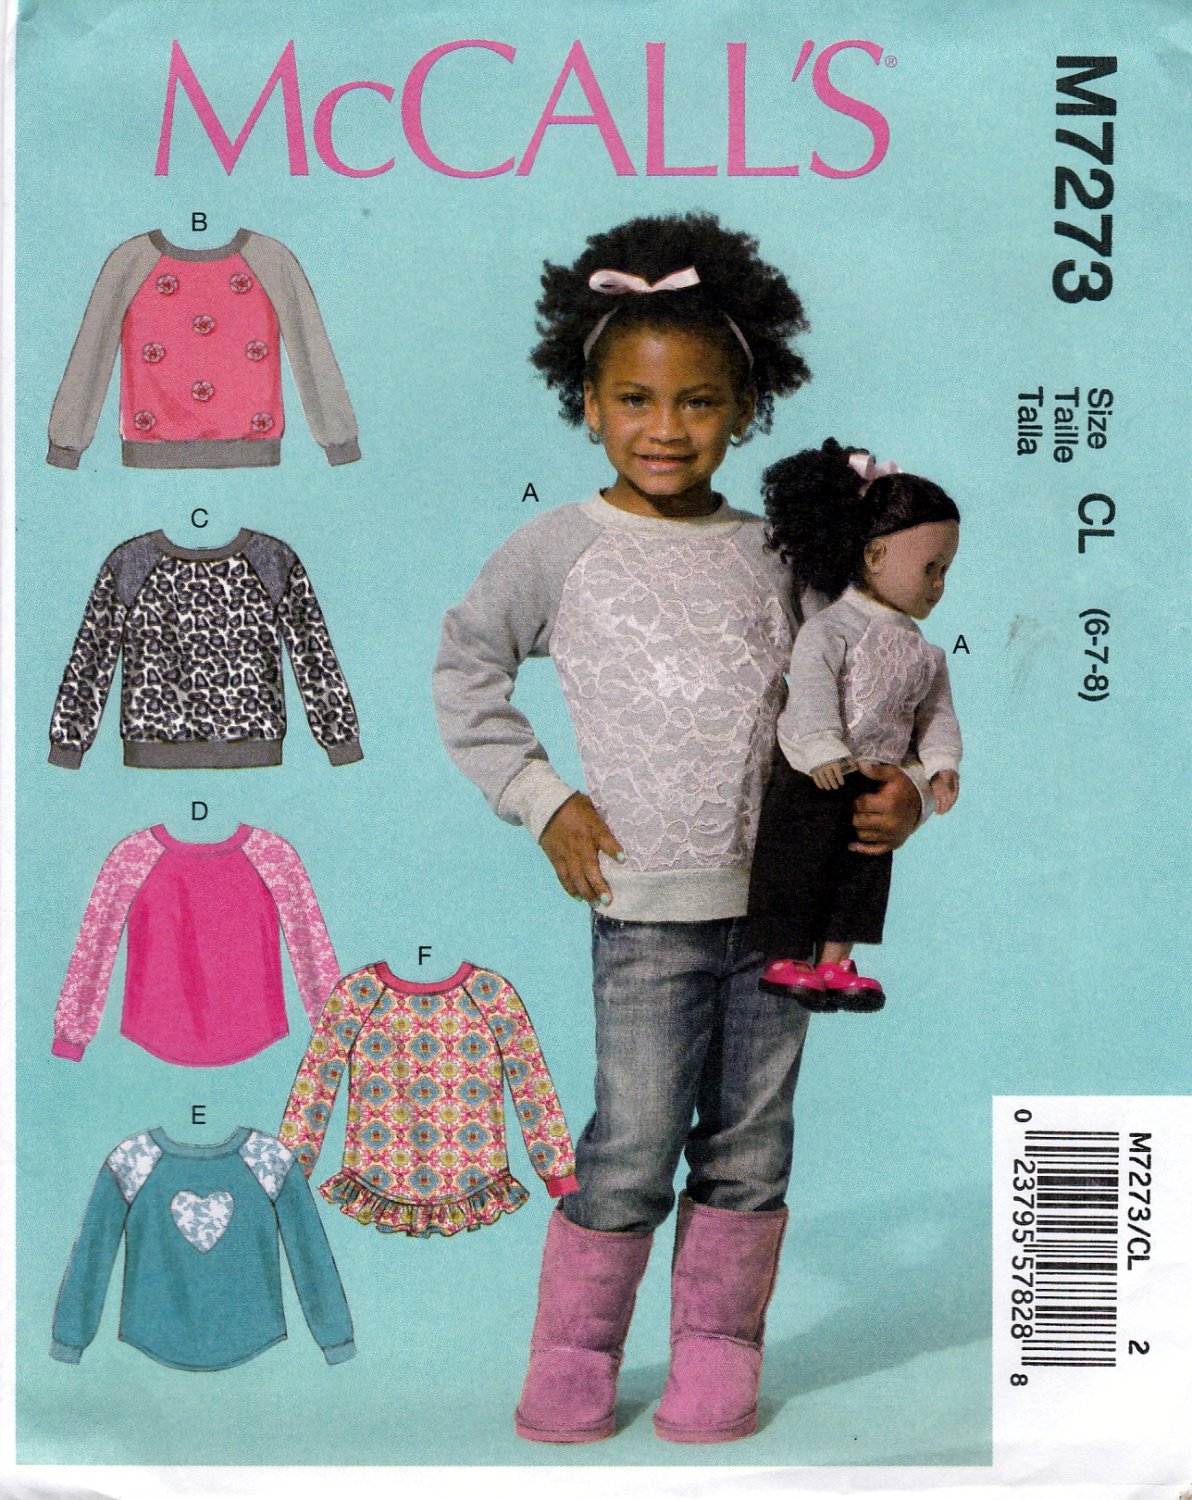 McCall's M7273 Girls Tops With Matching Top For 18" Doll Sewing Pattern Sizes 6-7-8